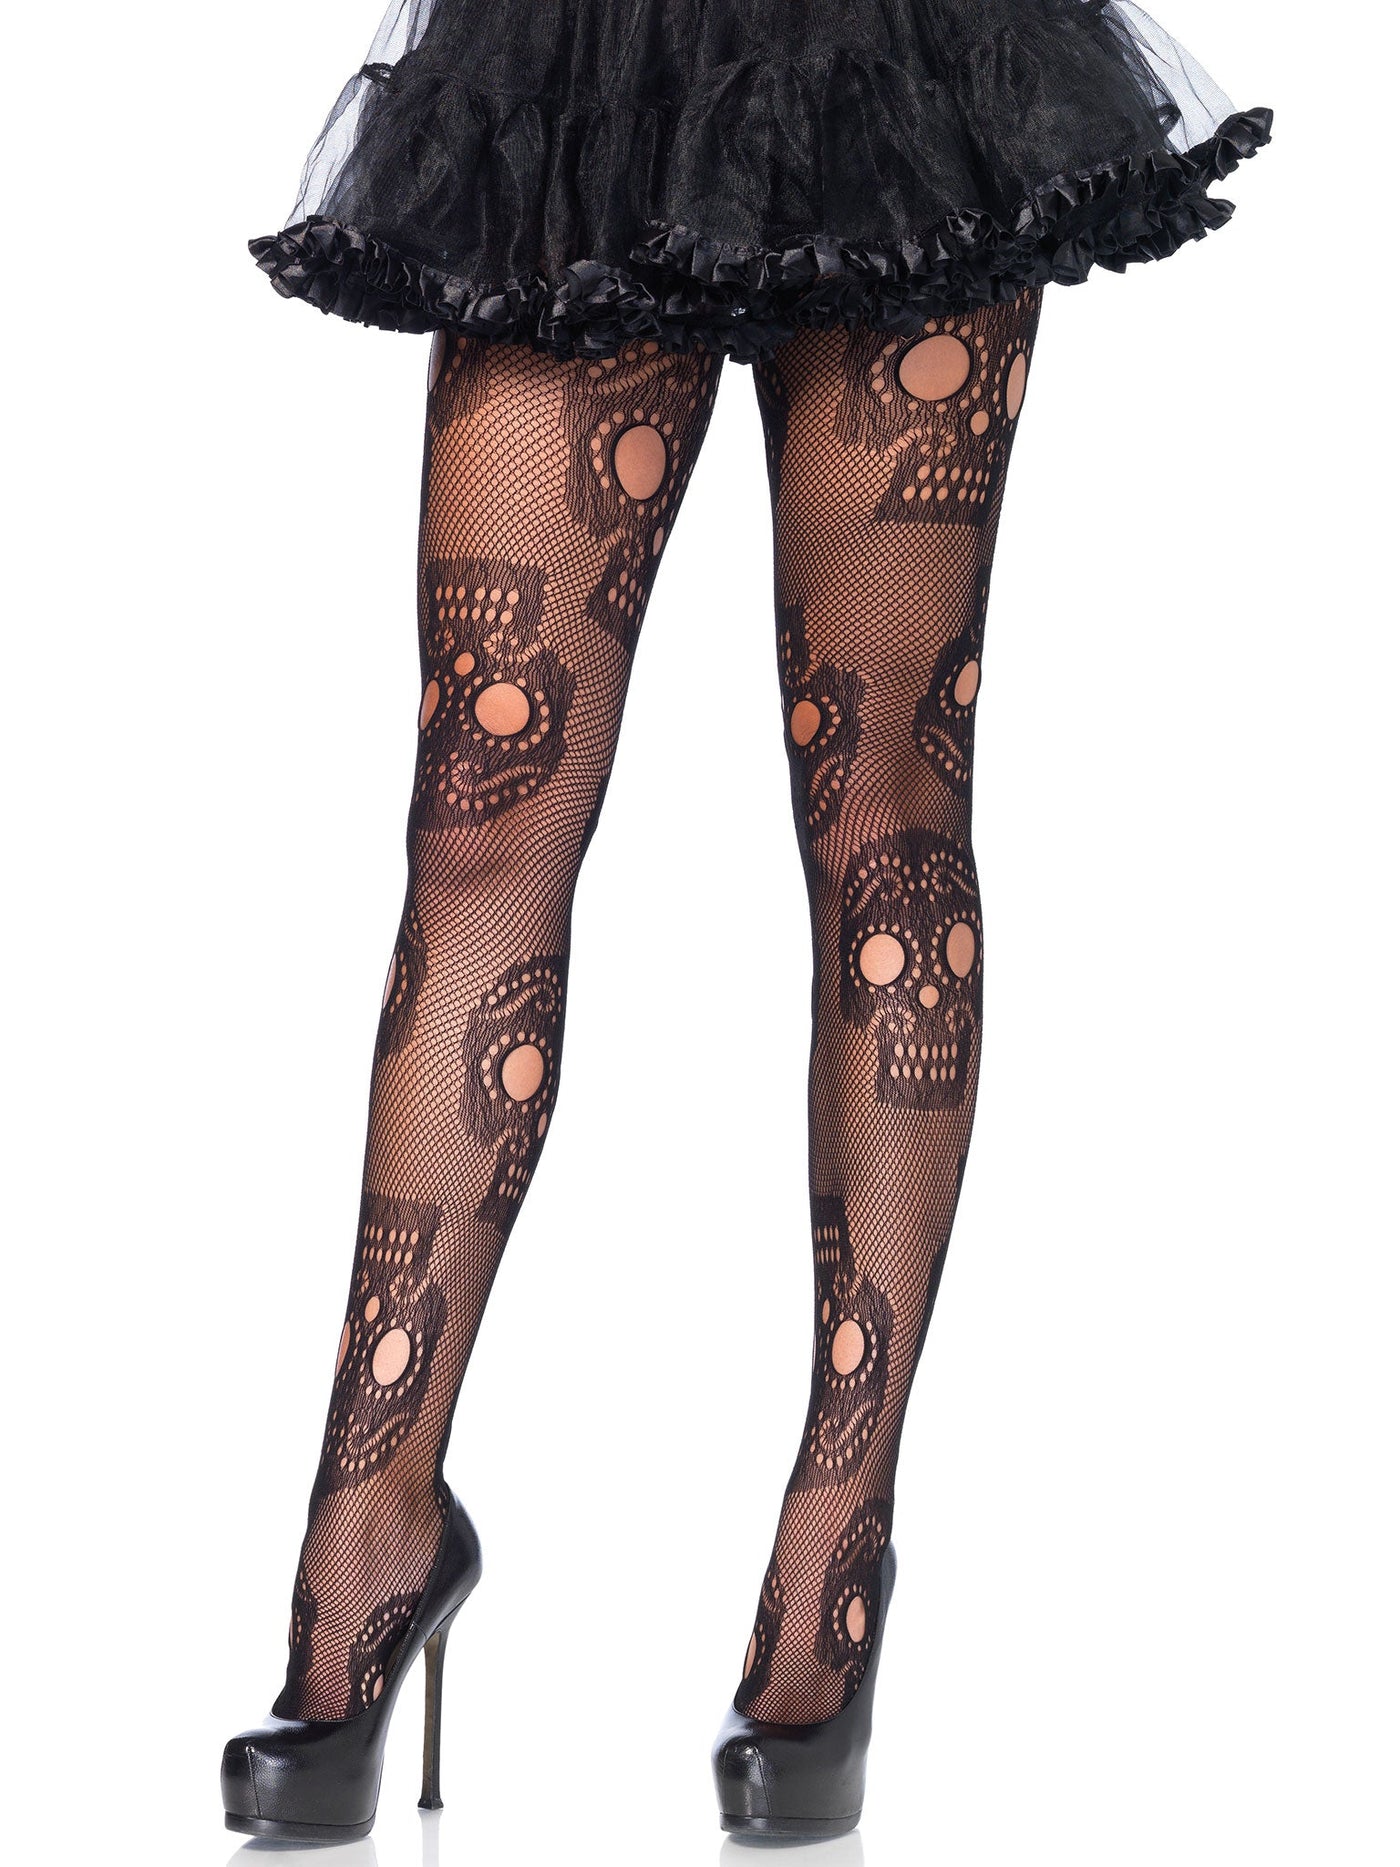 Sugar Skull Net Pantyhose - One Size - JJ's Party House